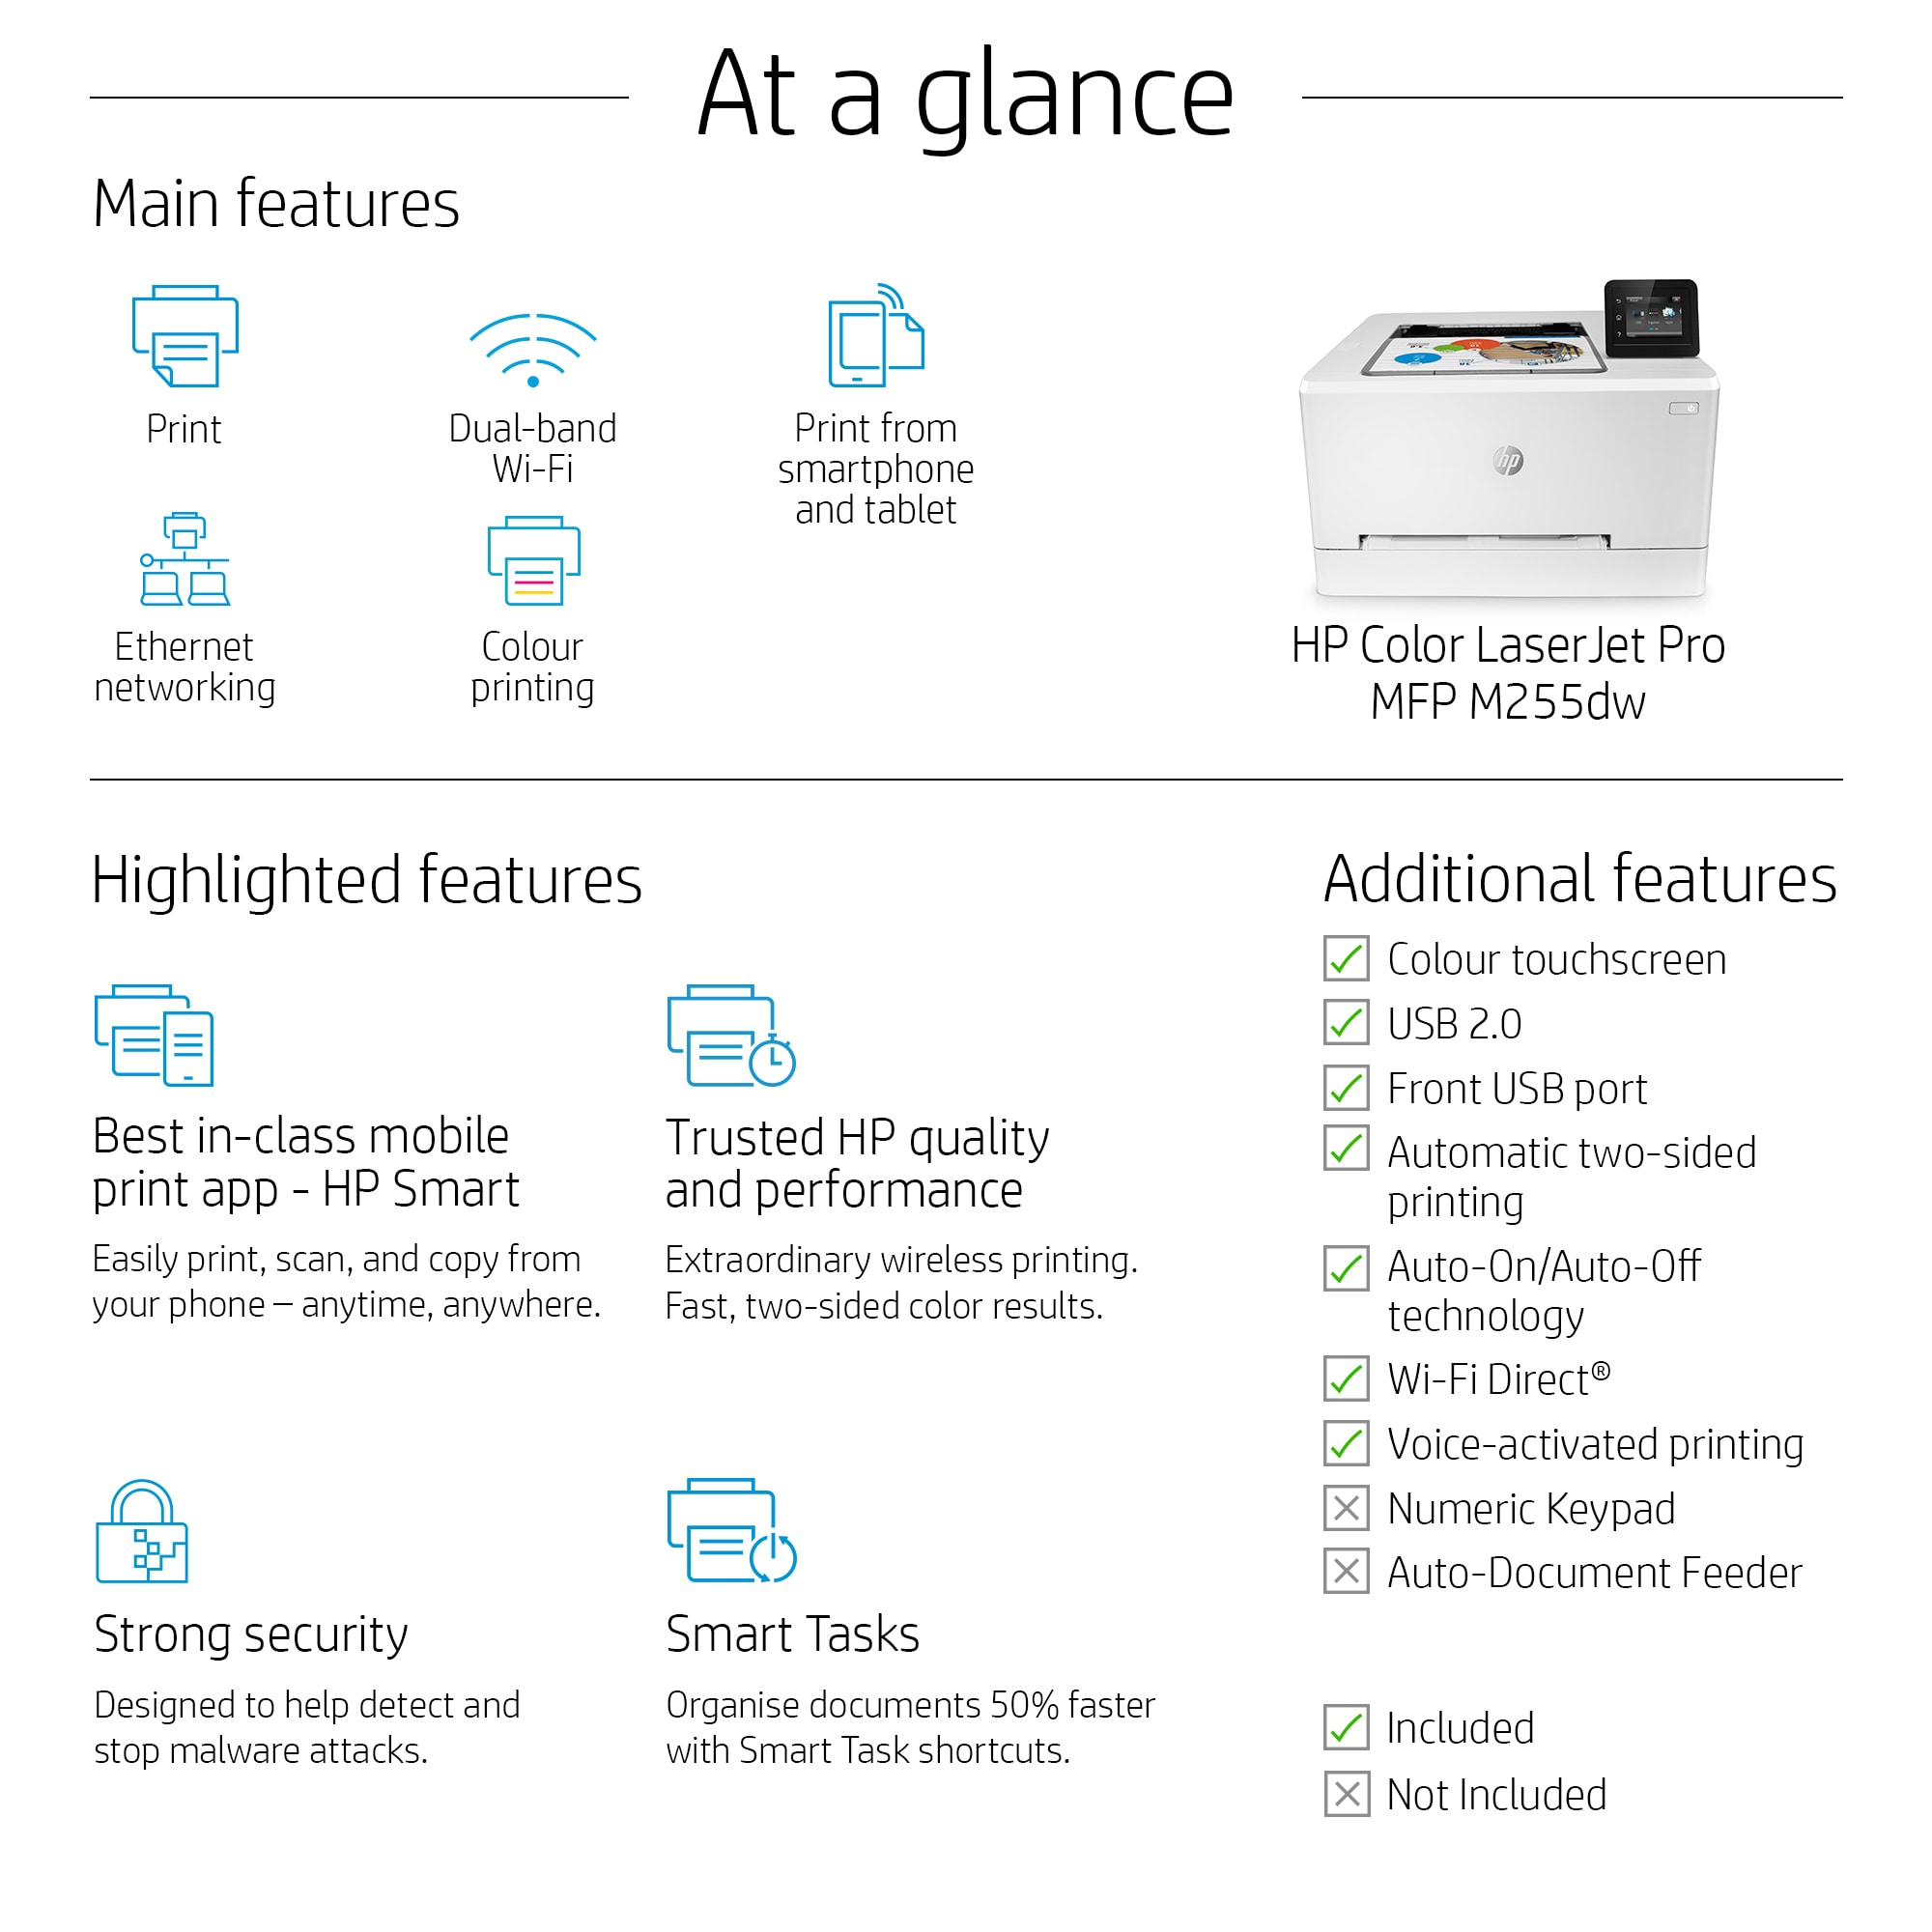 HP Color LaserJet Pro M255dw, Print, Two-sided printing; Energy Efficient; Strong Security; Dualband Wi-Fi